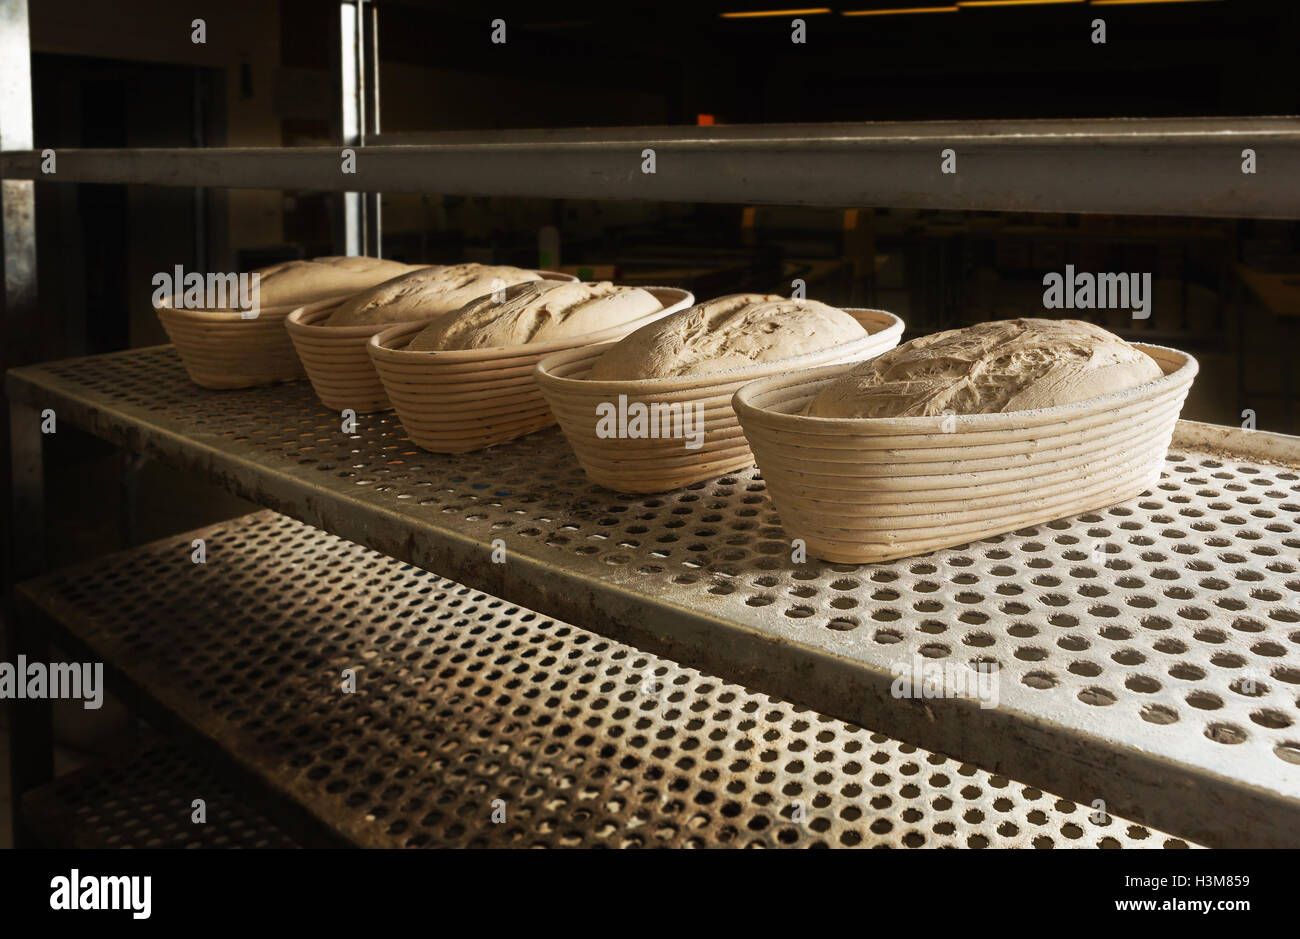 Raw leavened breads prepared on the rack before placing in the oven. Stock Photo